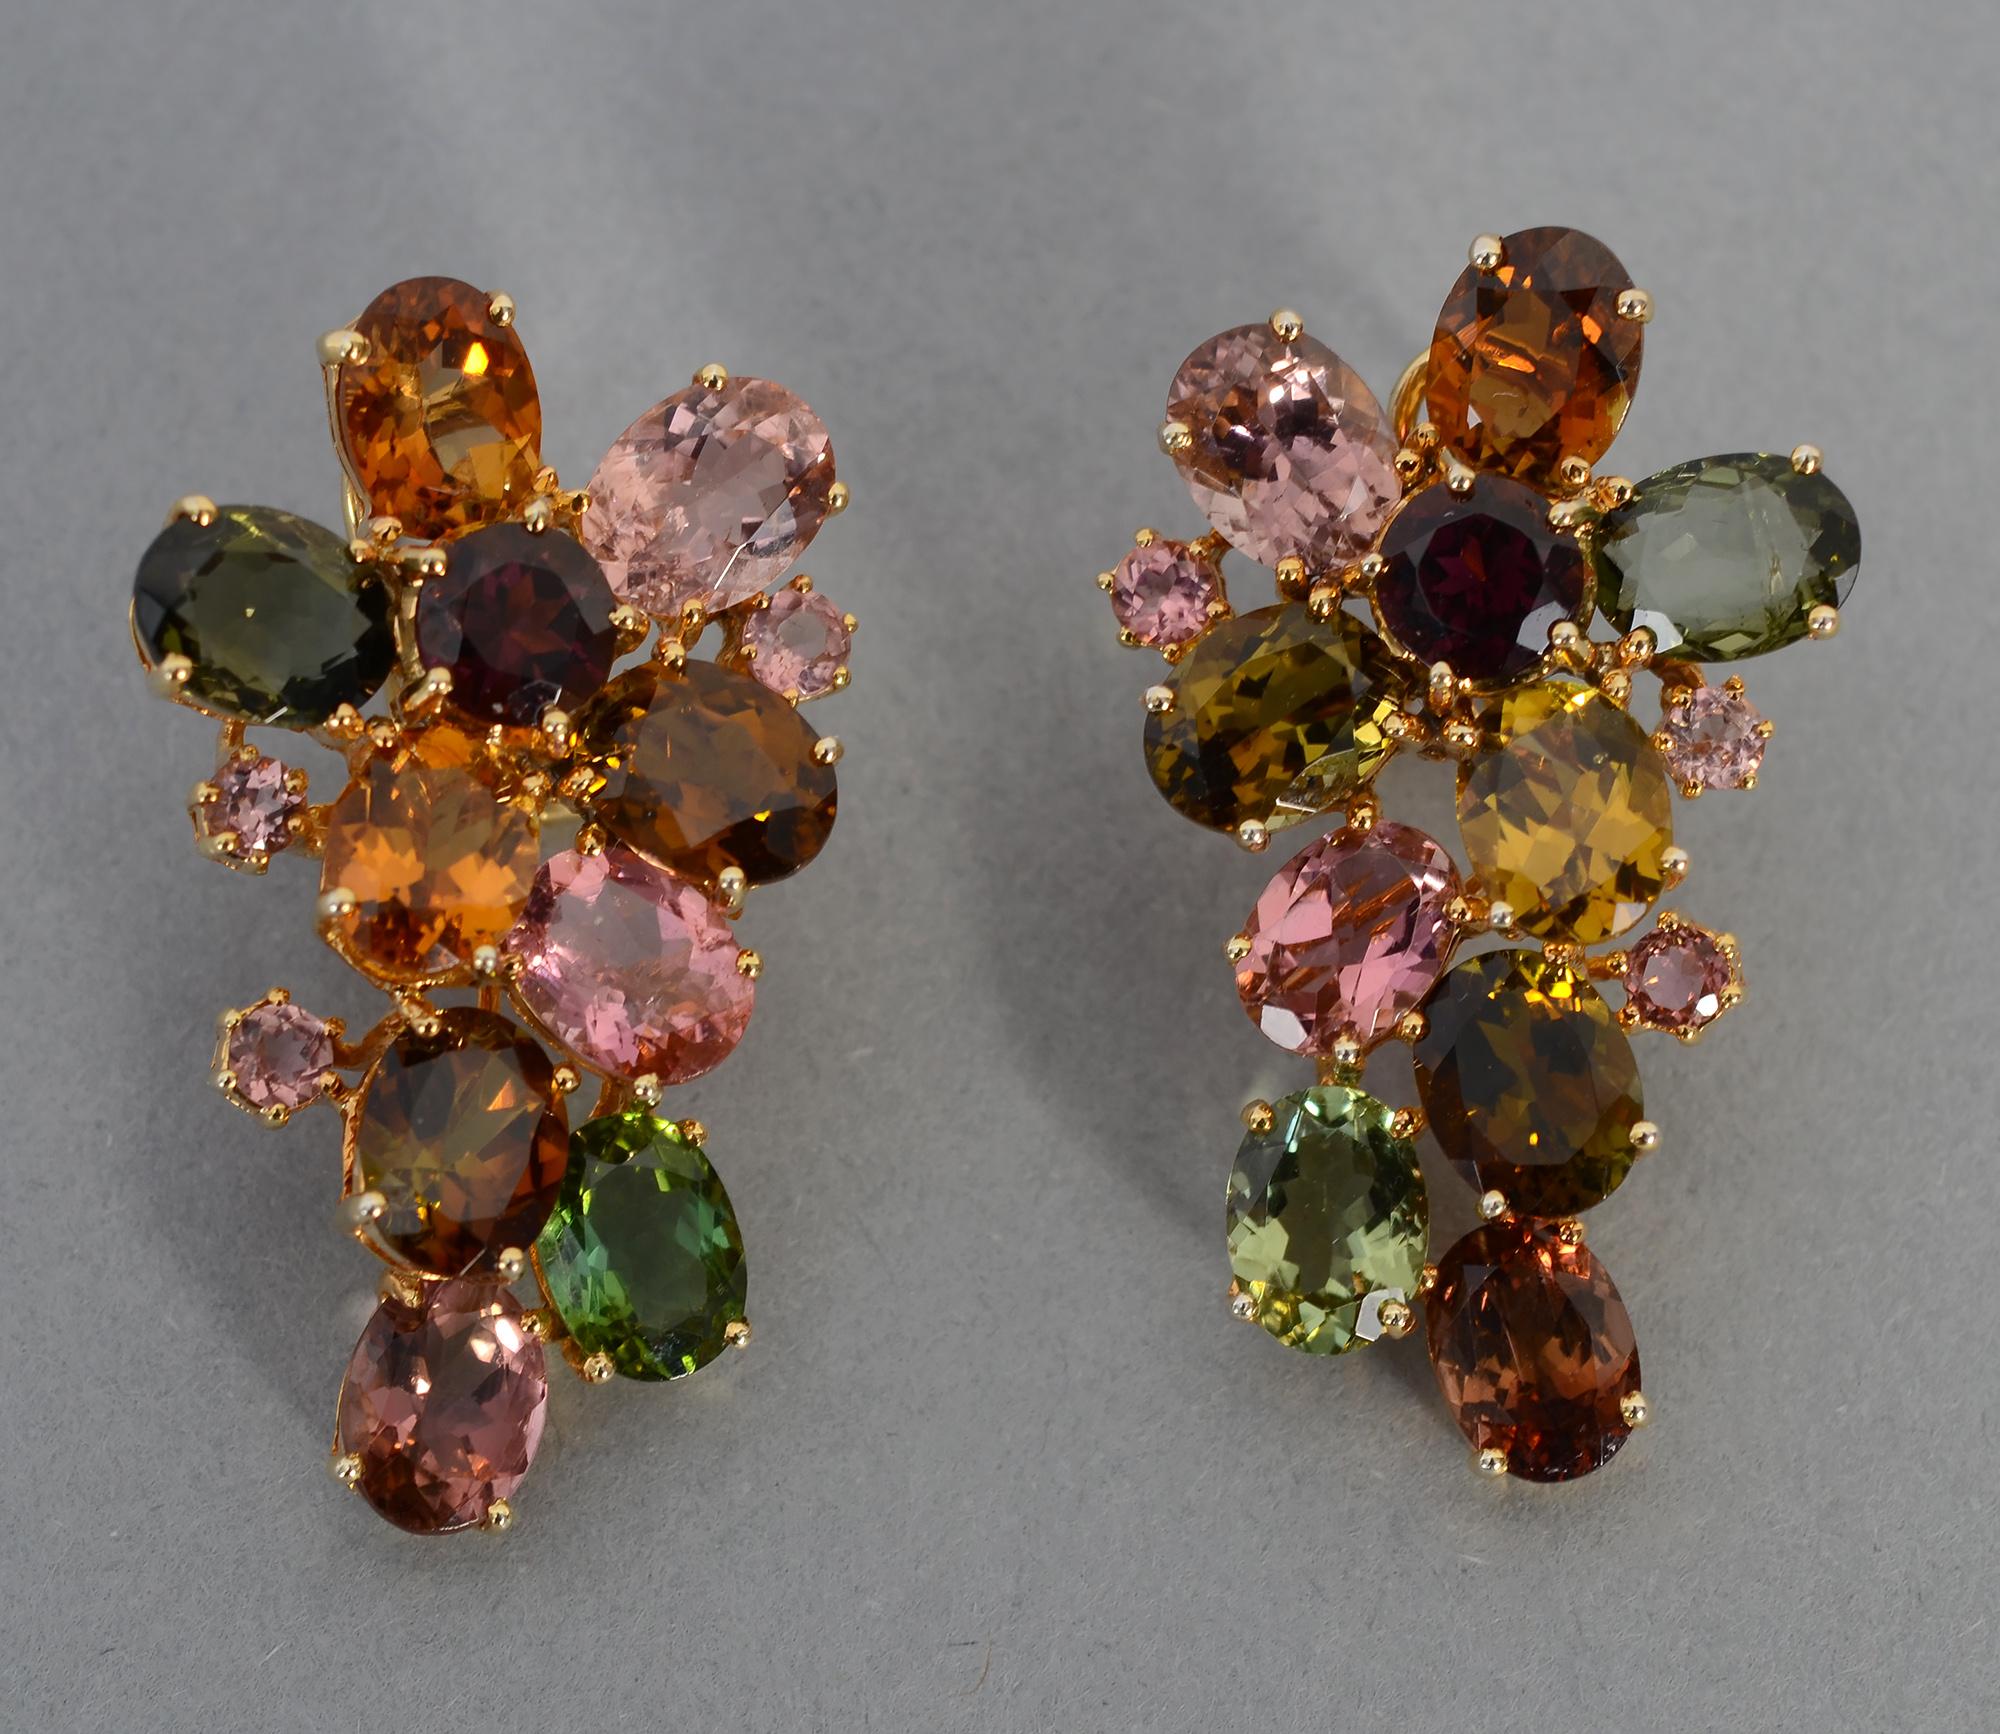 Multigem cascading earrings with oval stones that include: amethyst; garnet; citrine; tourmaline;and morganite. The faceted oval stones have several smaller round stones on either side. The variety of rich colors make these wearable with virtually